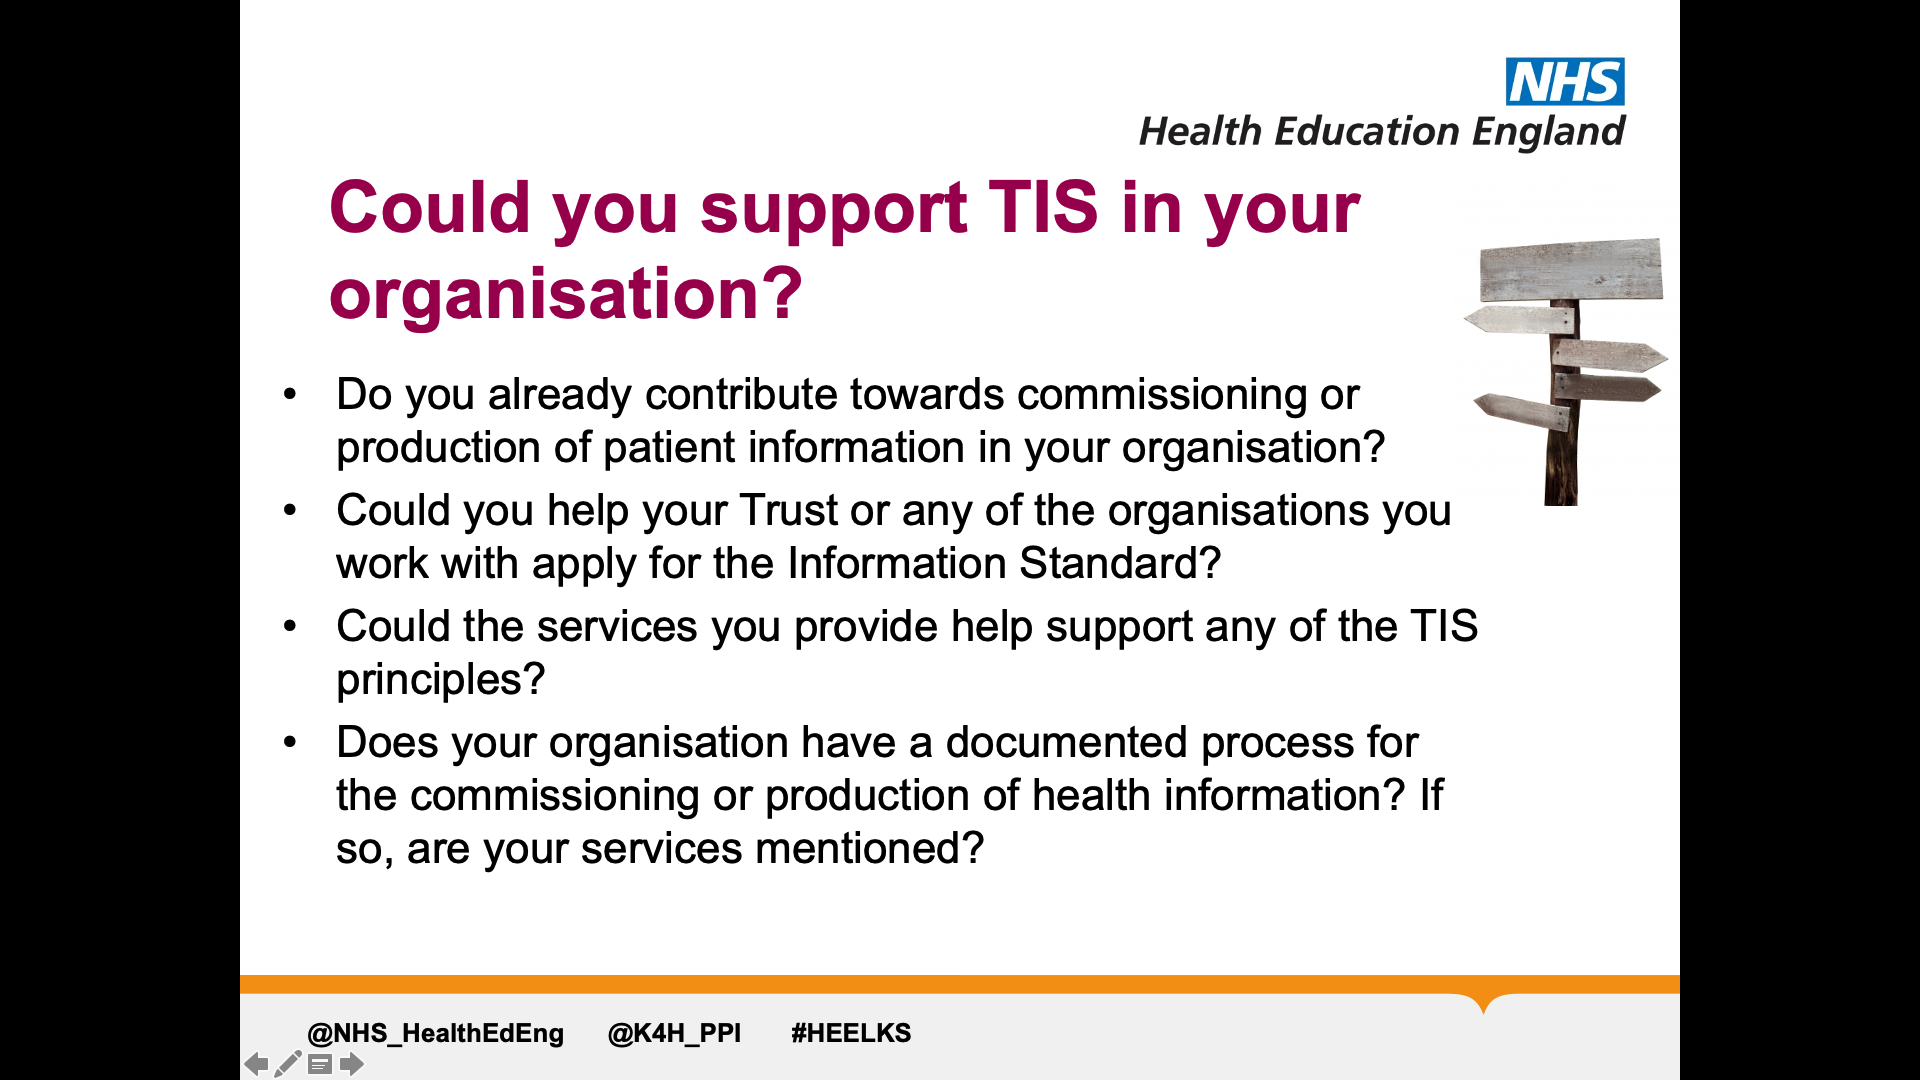 Title: Could you support TIS in your organisation? Text on page: Do you already contribute towards commissioning or production of patient information in your organisation? Could you help your Trust or any of the organisations you work with apply for the Information Standard? Could the services you provide help support any of the TIS principles? Does your organisation have a documented process for the commissioning or production of health information? If so, are your services mentioned?